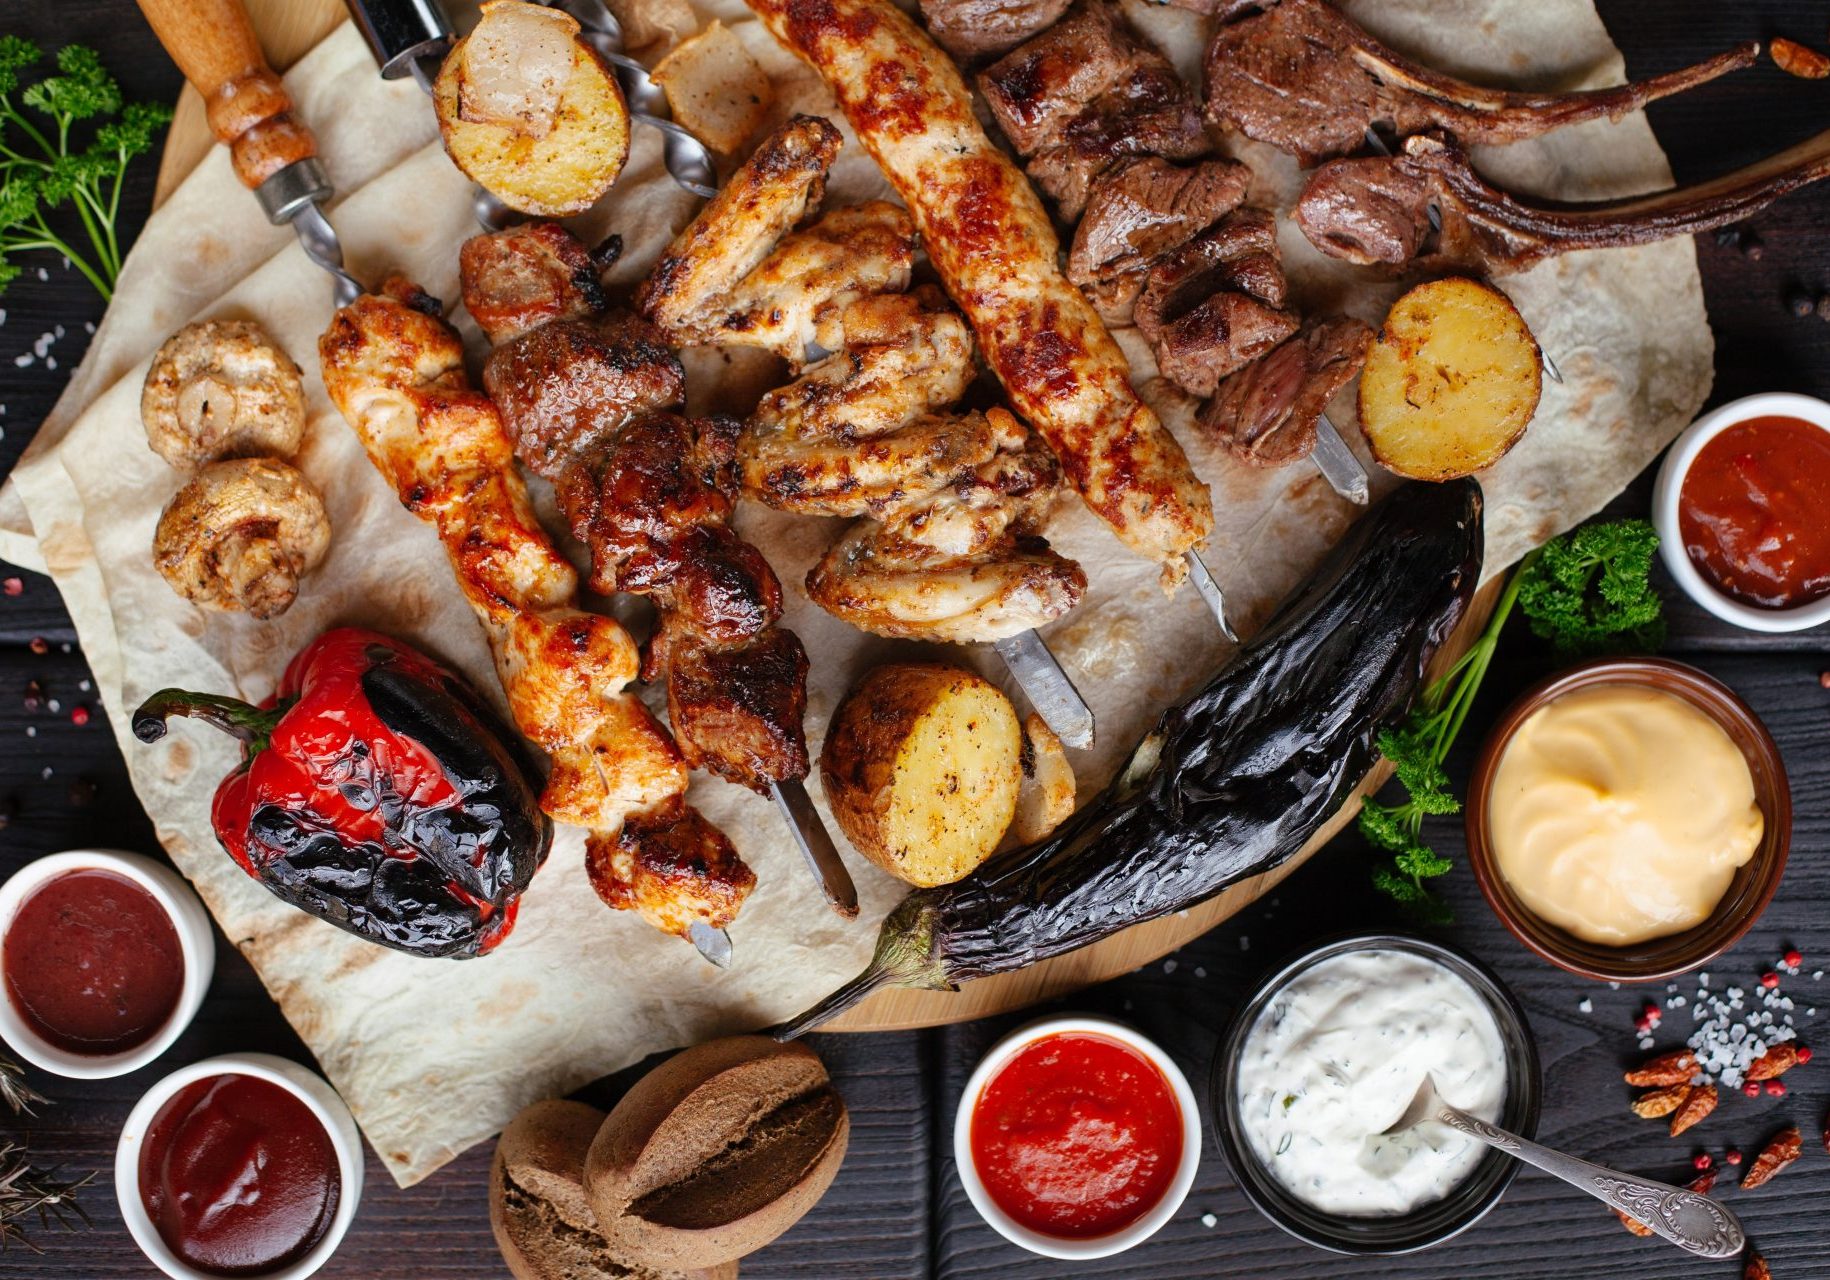 Barbecue meat and sausages with vegetables and dips on a black background